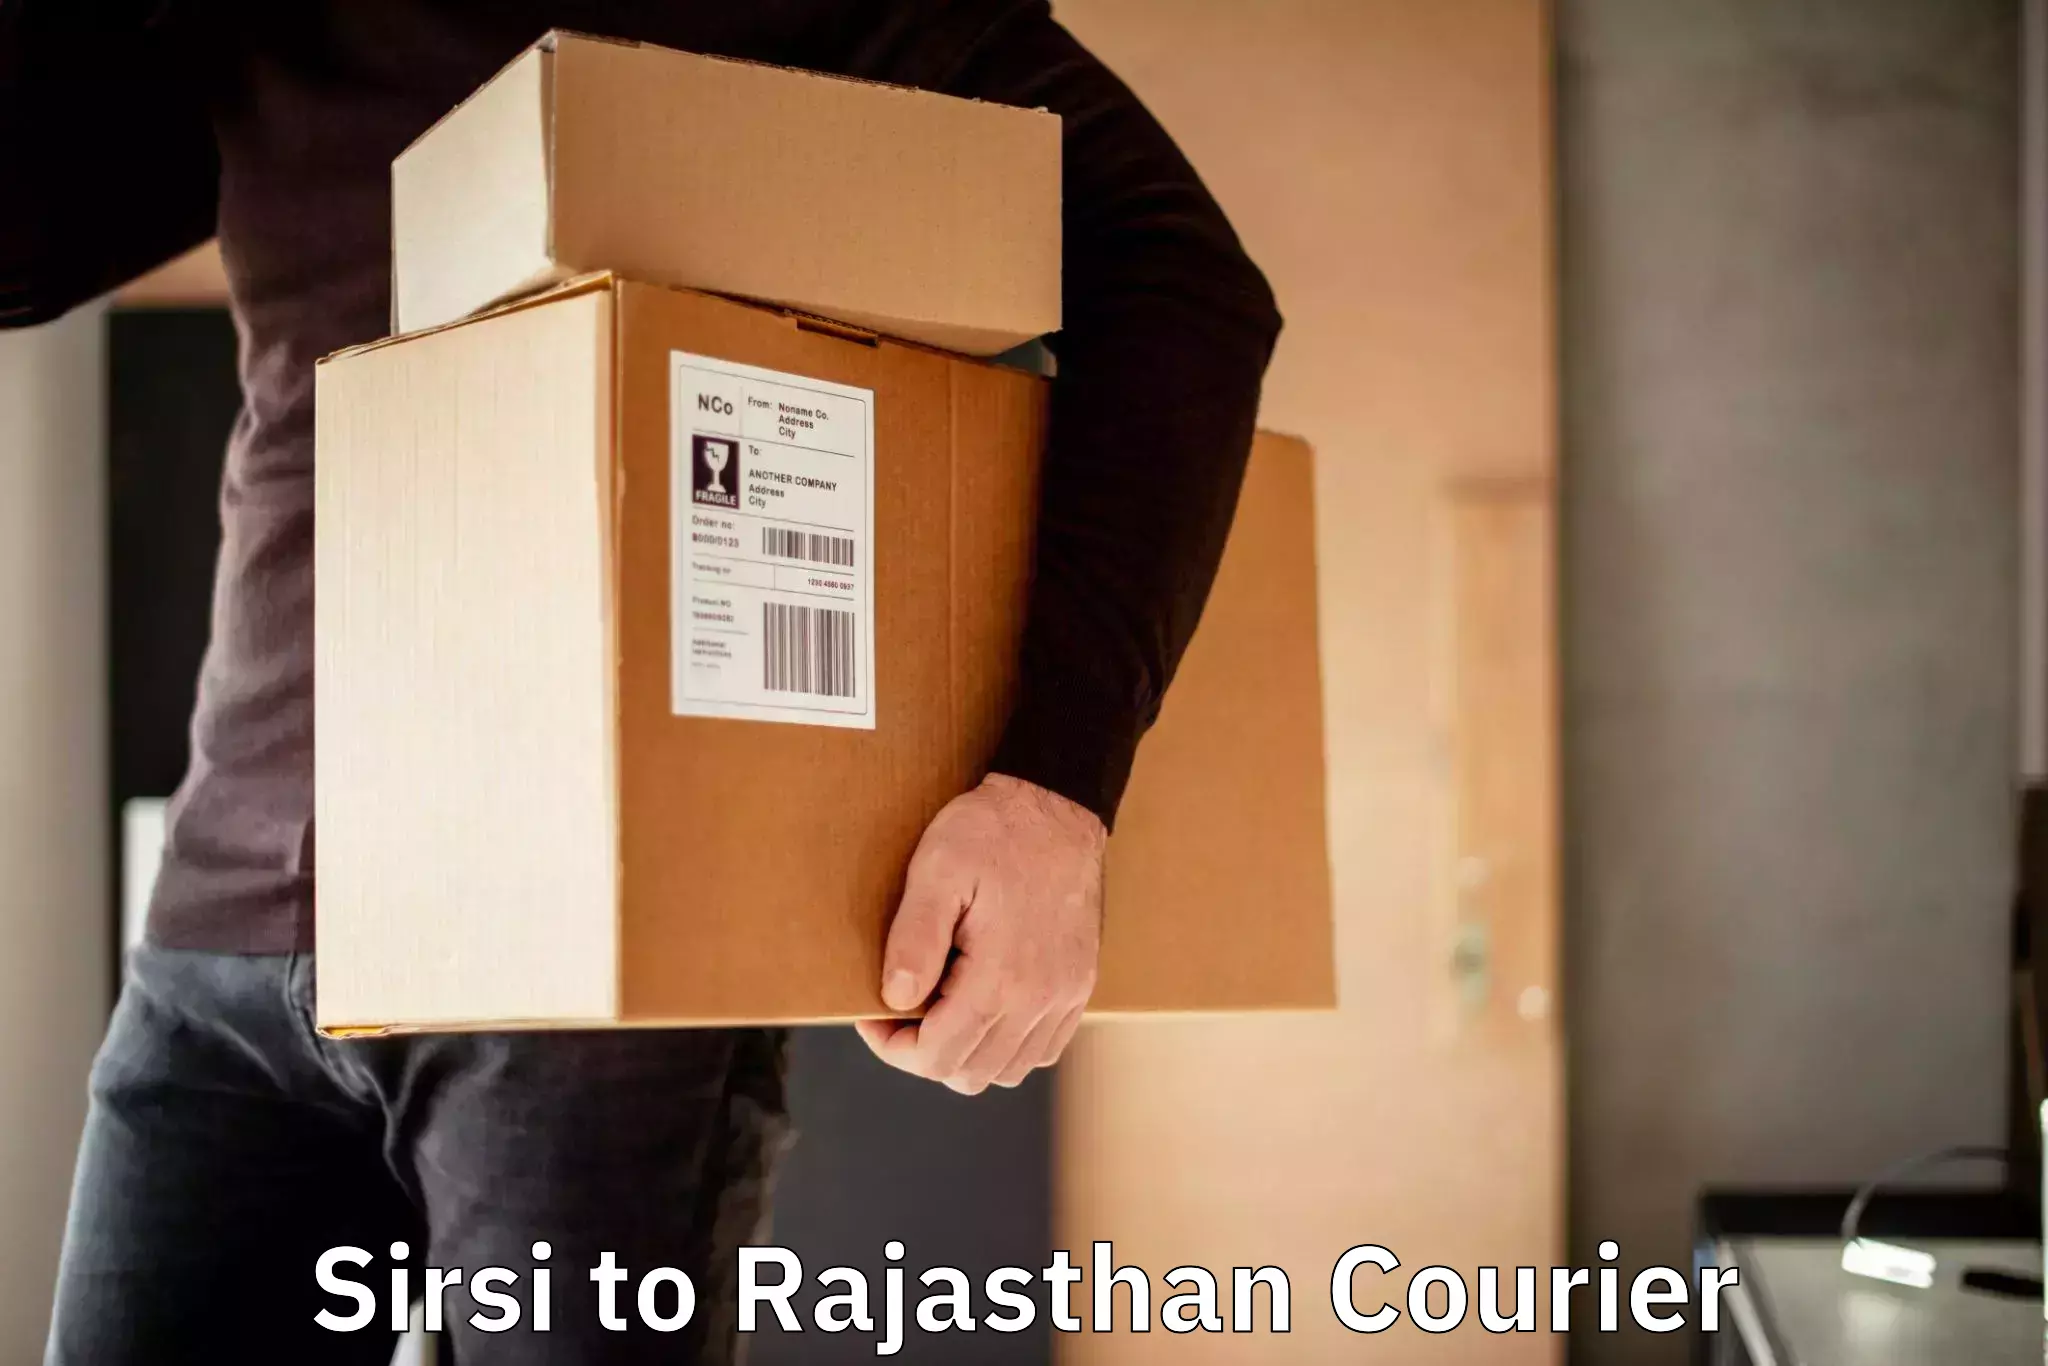 High-speed parcel service Sirsi to Rajasthan